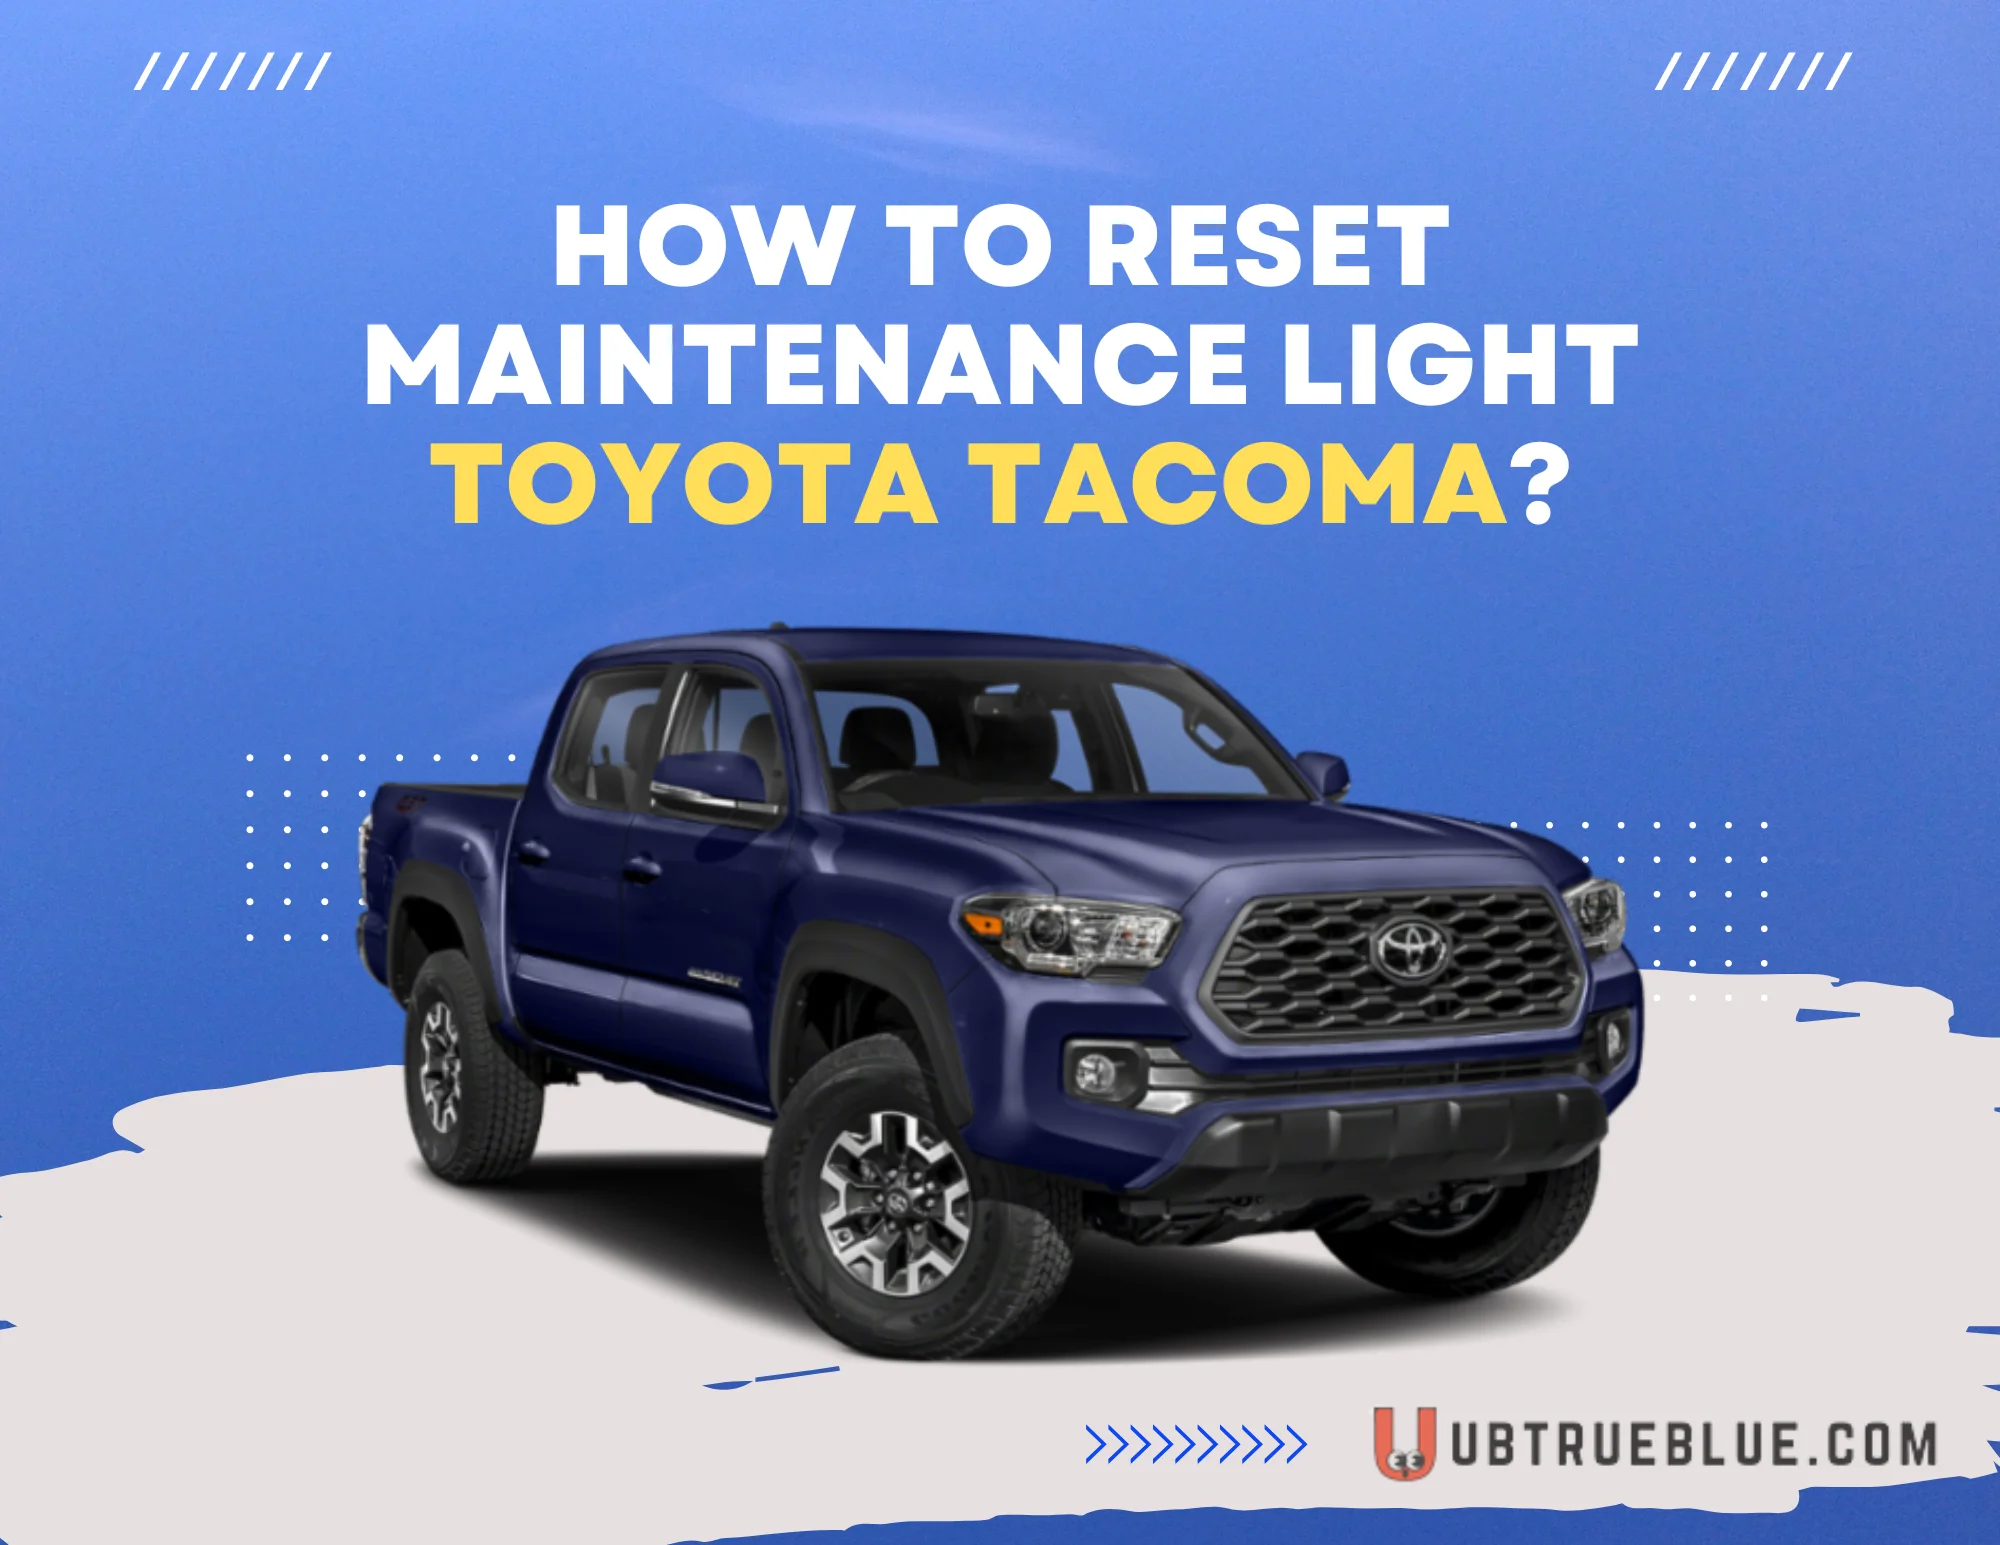 How To Reset Maintenance Light On Toyota Tacoma Ubtrueblue Automotive Required 3rd Gen 2nd Schedule Turn Off  Full